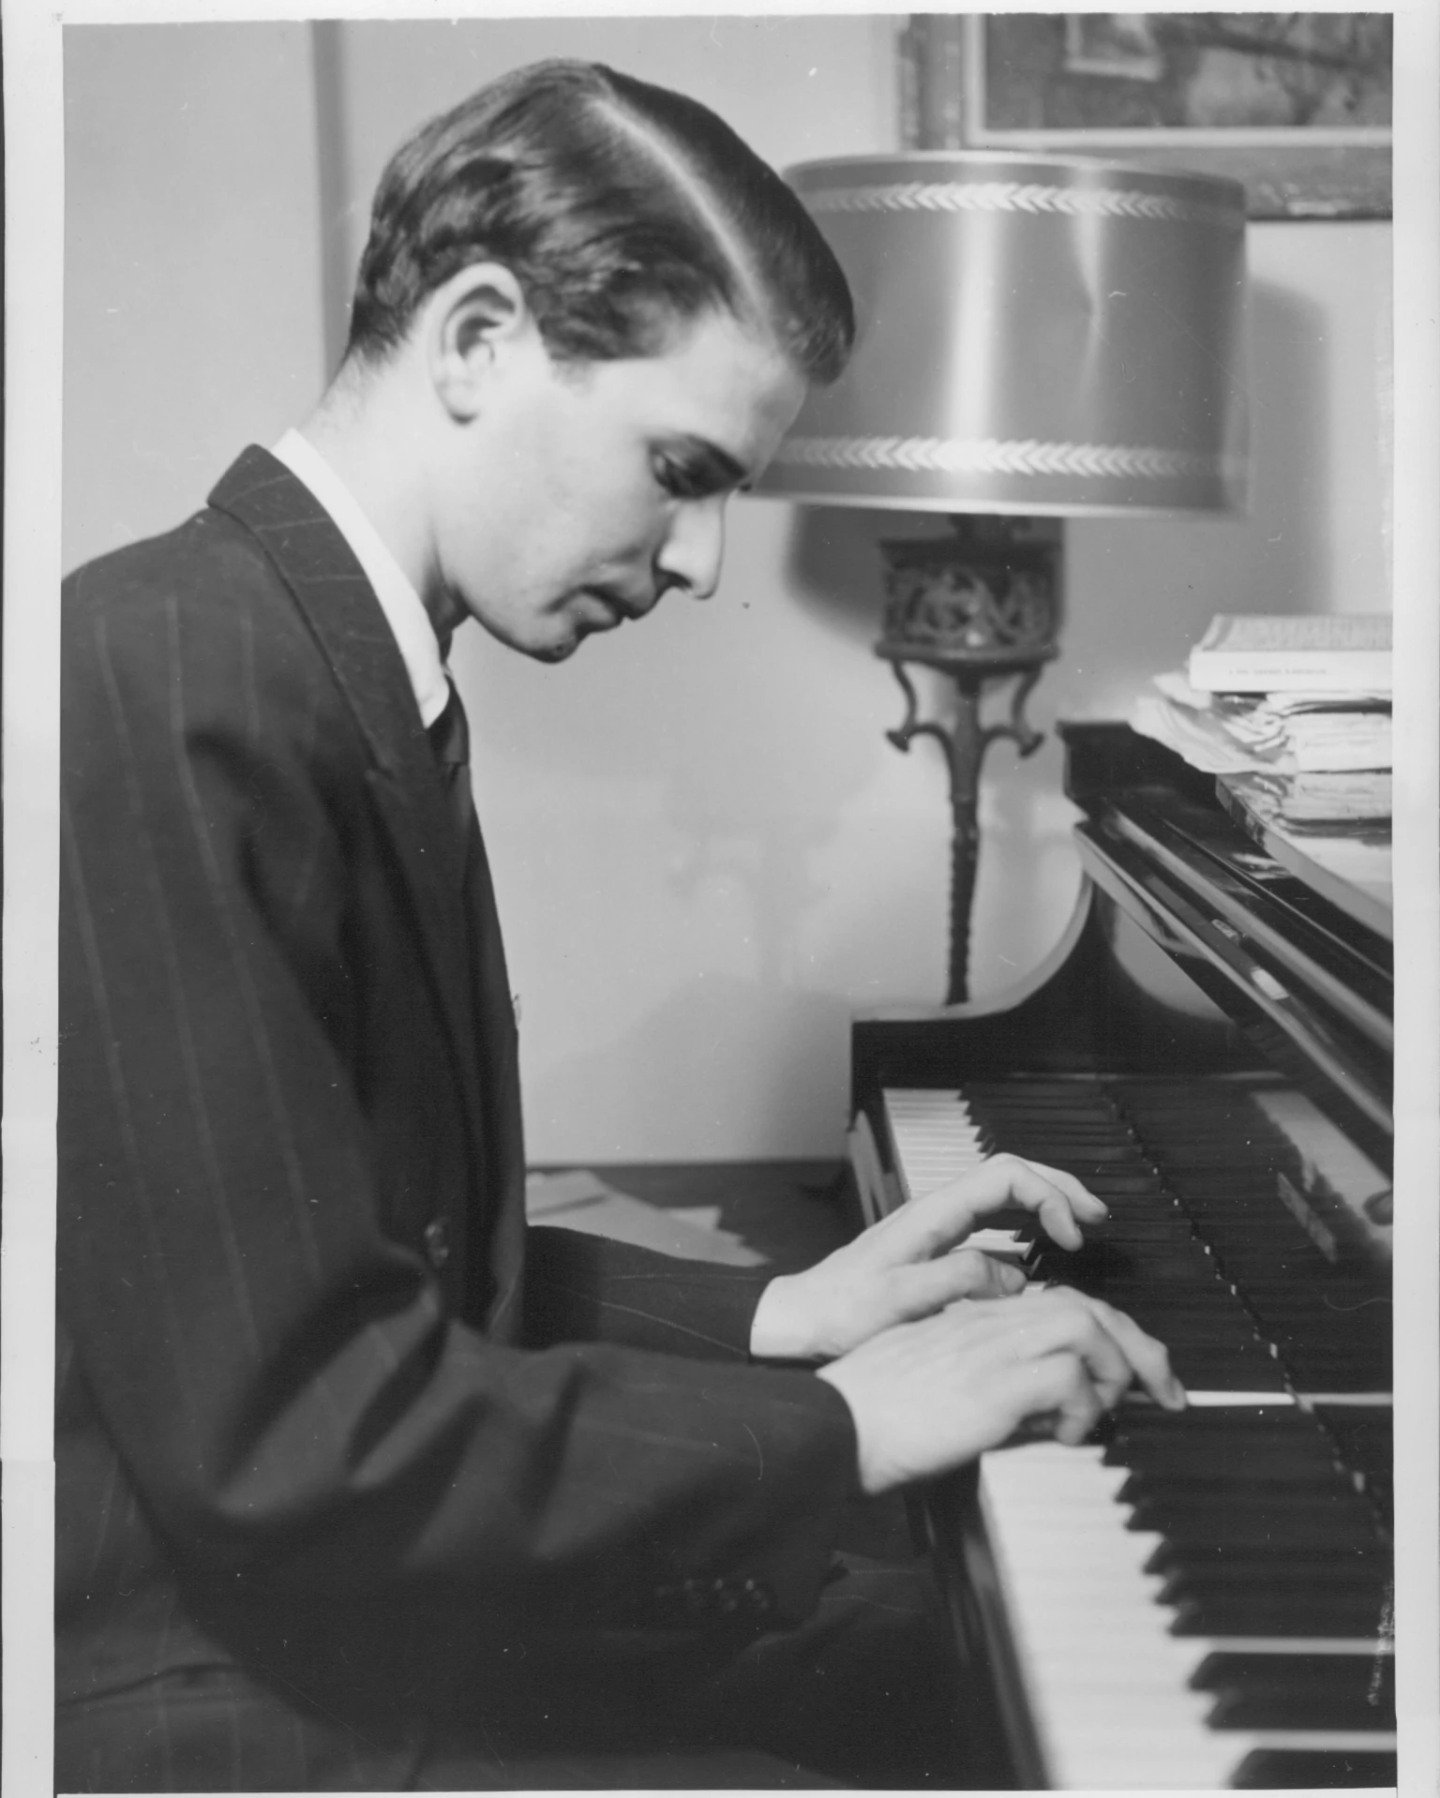 🎵 Today's tip comes from the essence of Byron's early passion for the piano:

🚀 Consistent Practice: Just like young Byron's dedication to honing his craft, consistent practice is key to mastering any skill. Set aside regular practice sessions to r